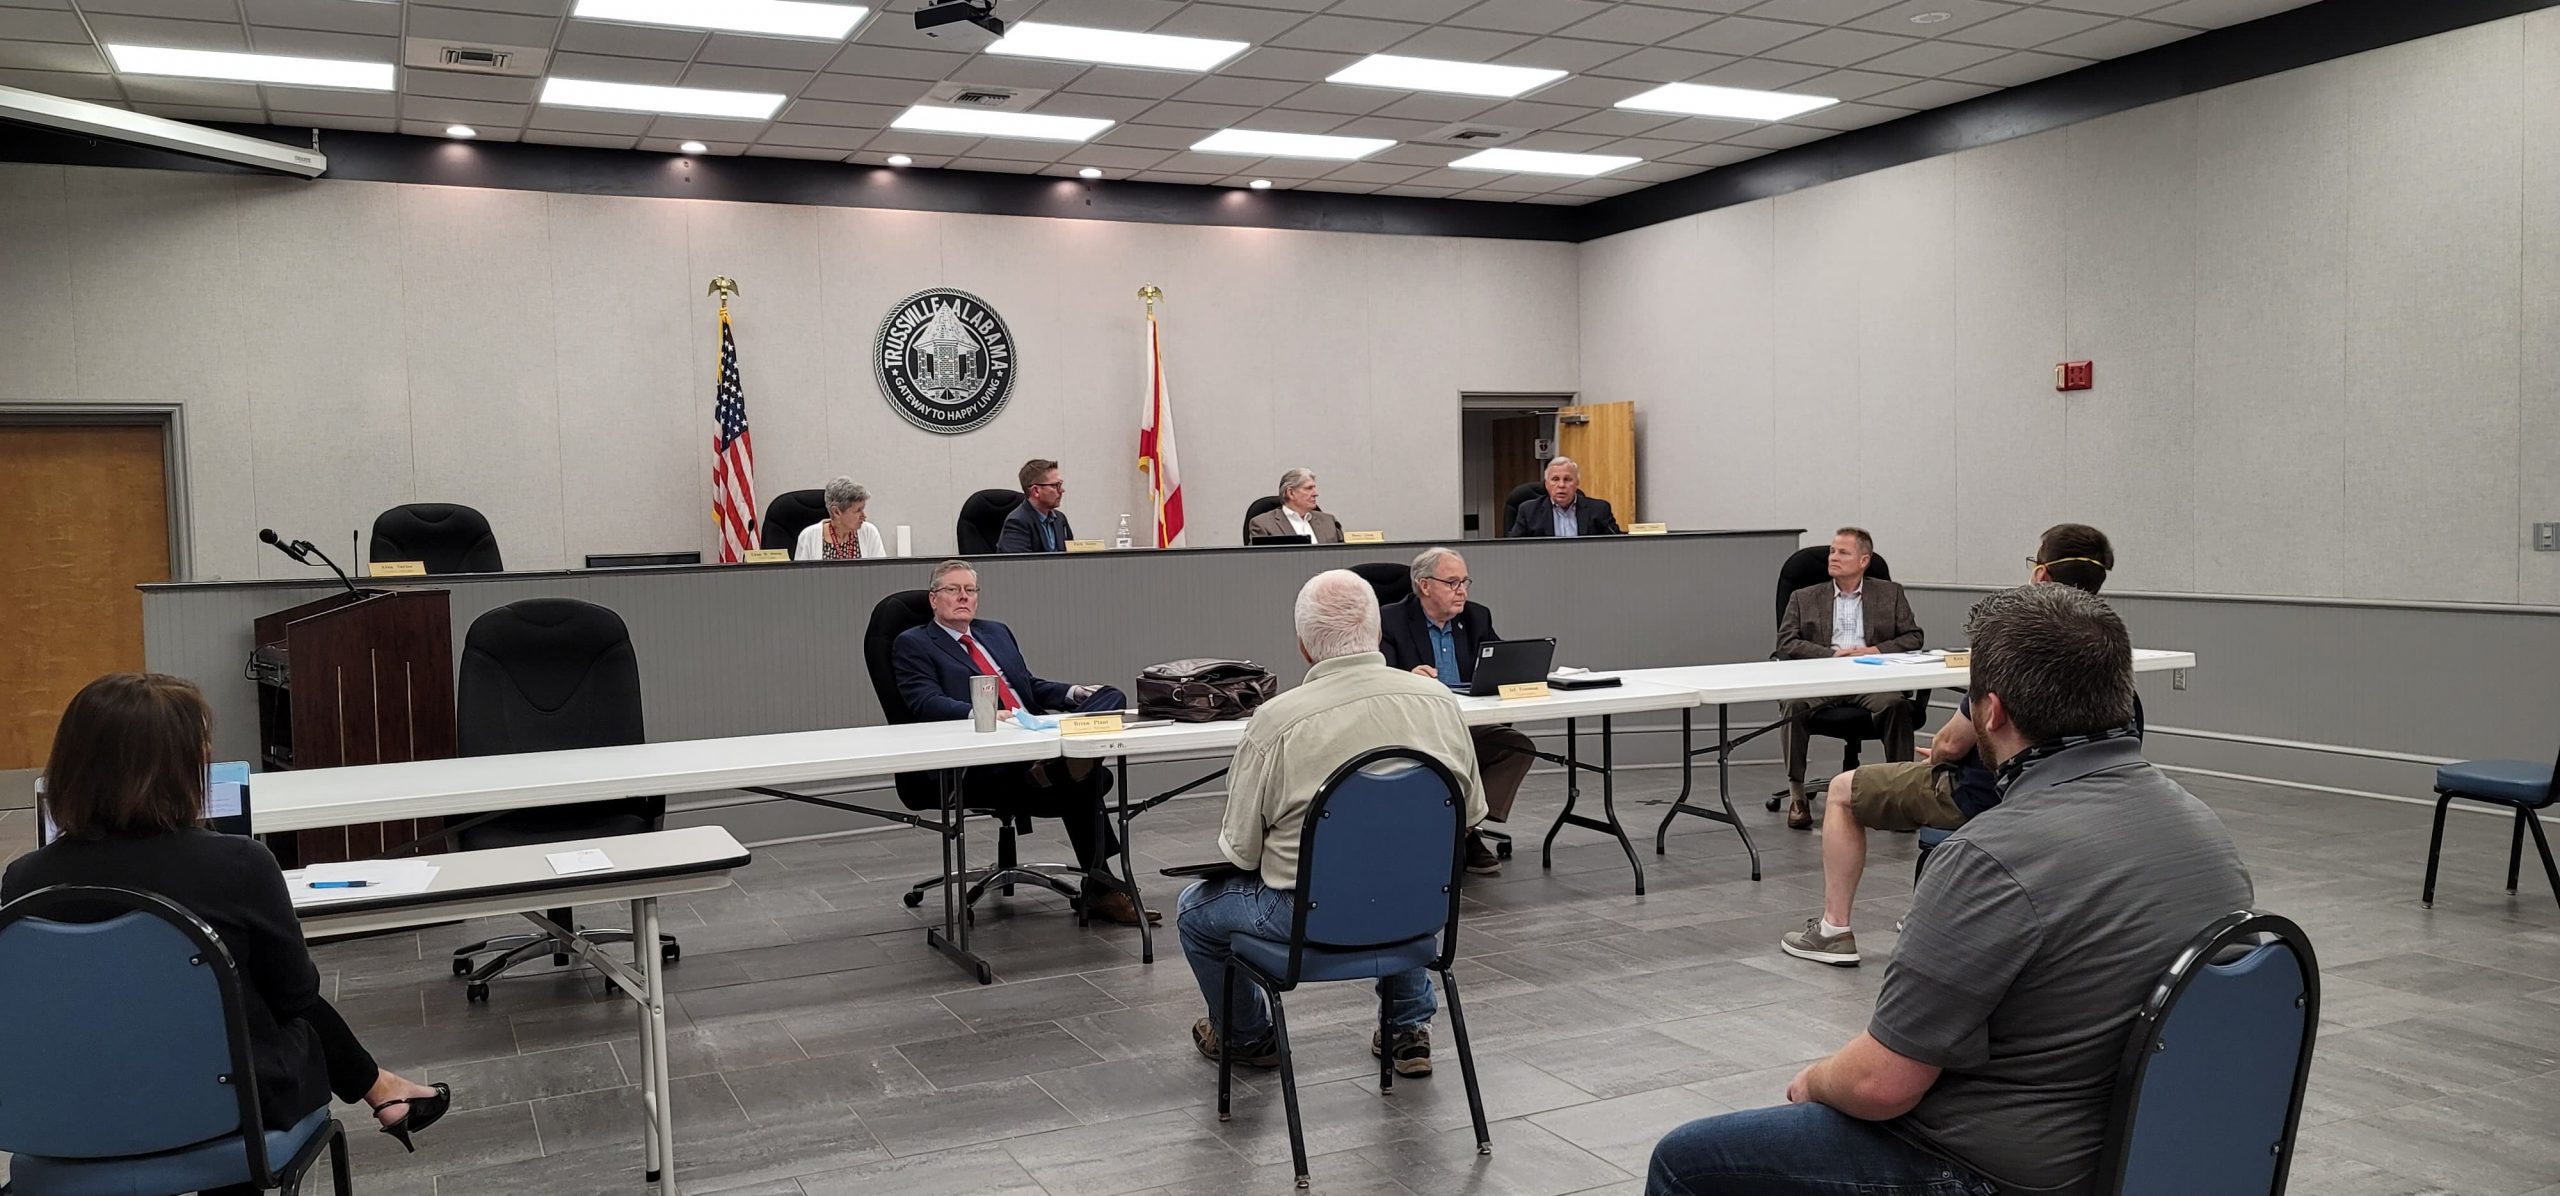 Trussville City Council acknowledges resignation of HR Director and retirement of Library Director